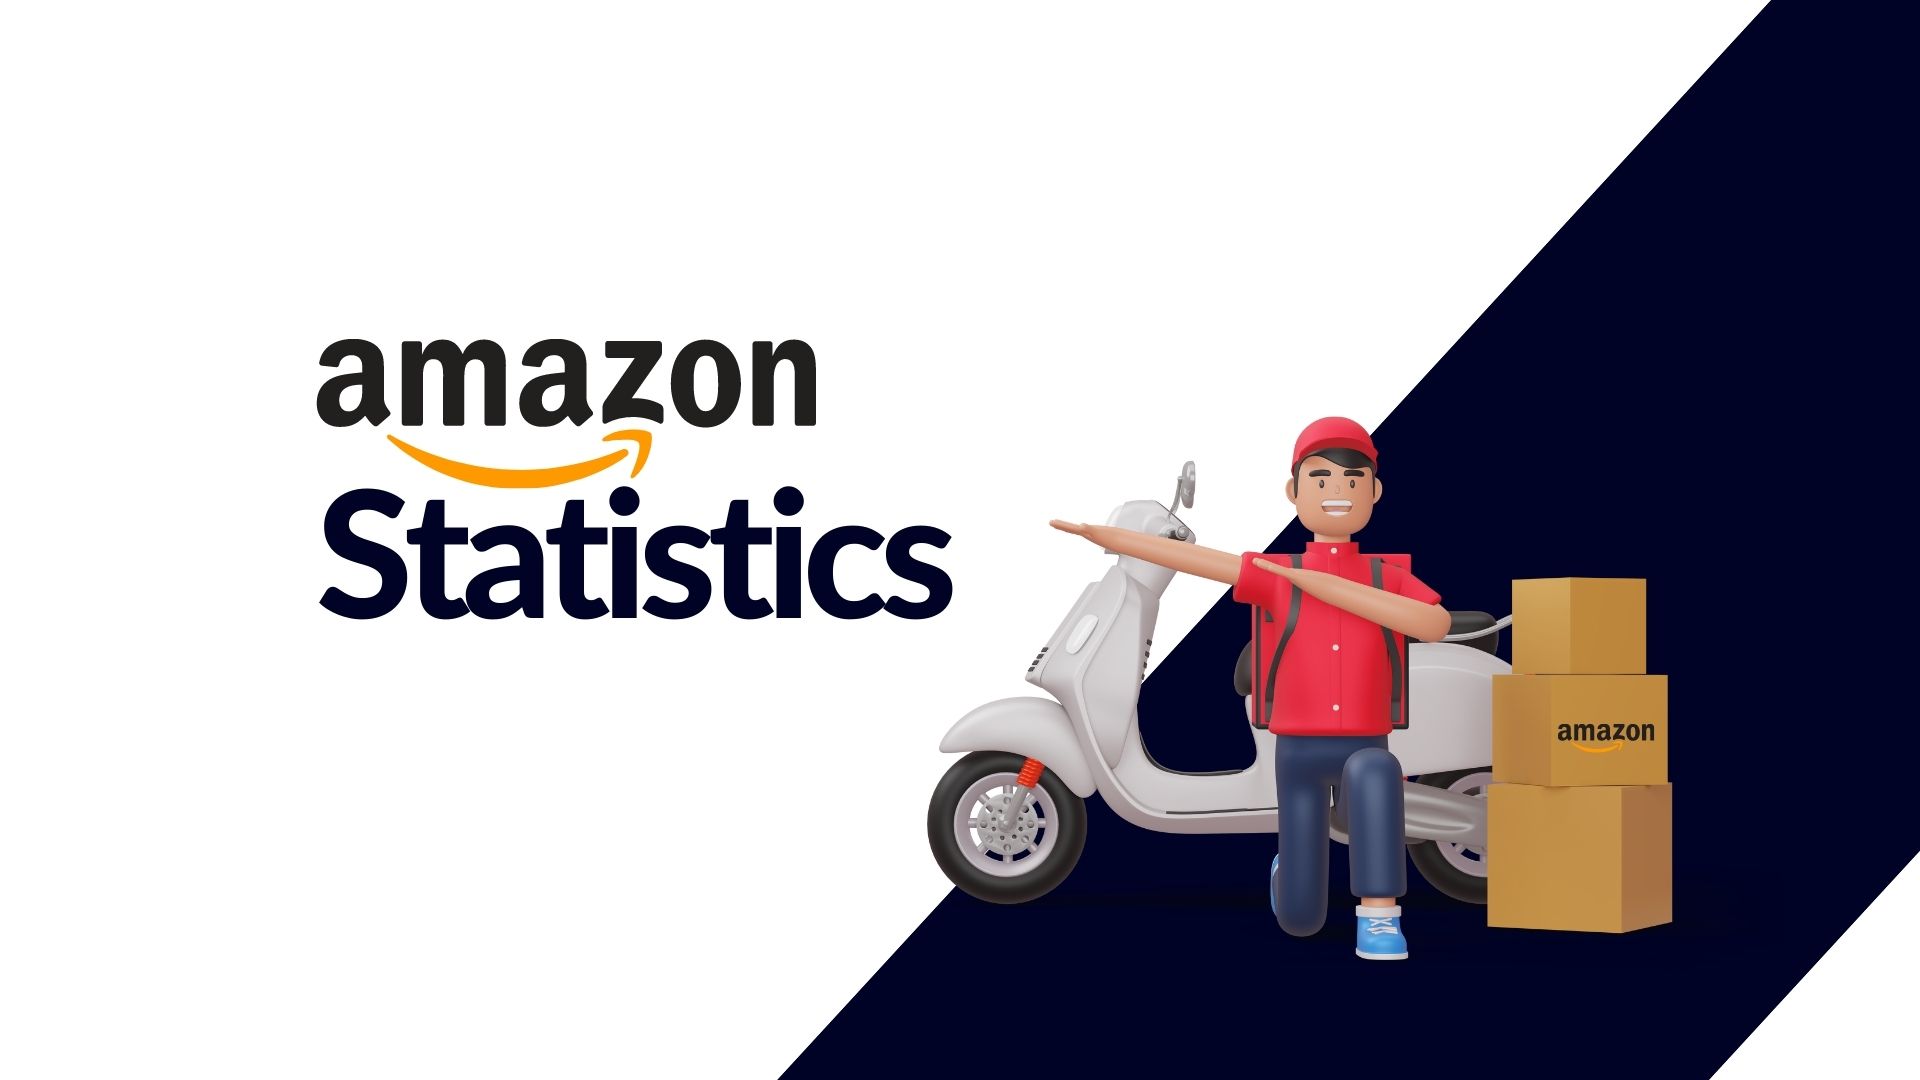 Amazon Statistics By Consumer Behavior, Website Traffic by Device, Social Media Referral Distribution, Demographics and Net Sales